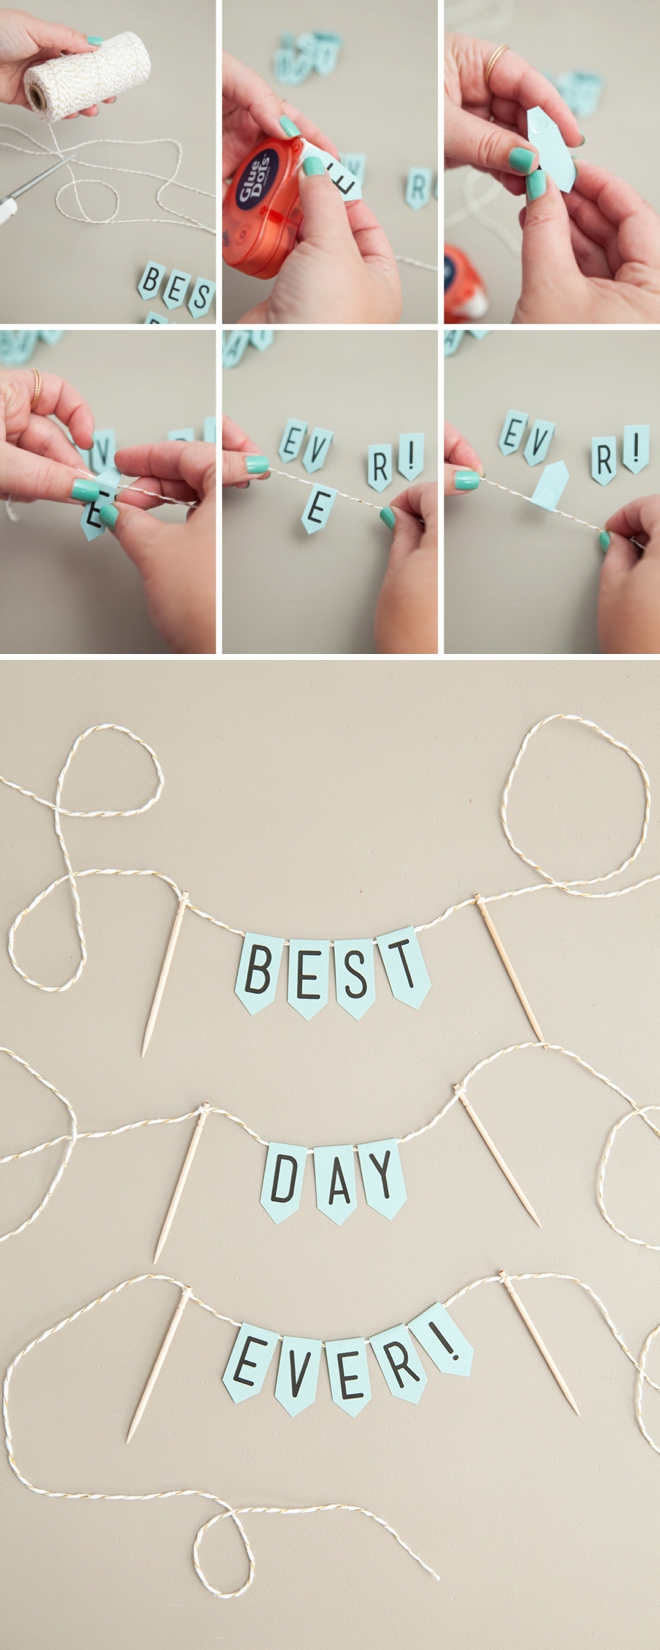 Check out this adorable, free printable mini-banner, so cute!